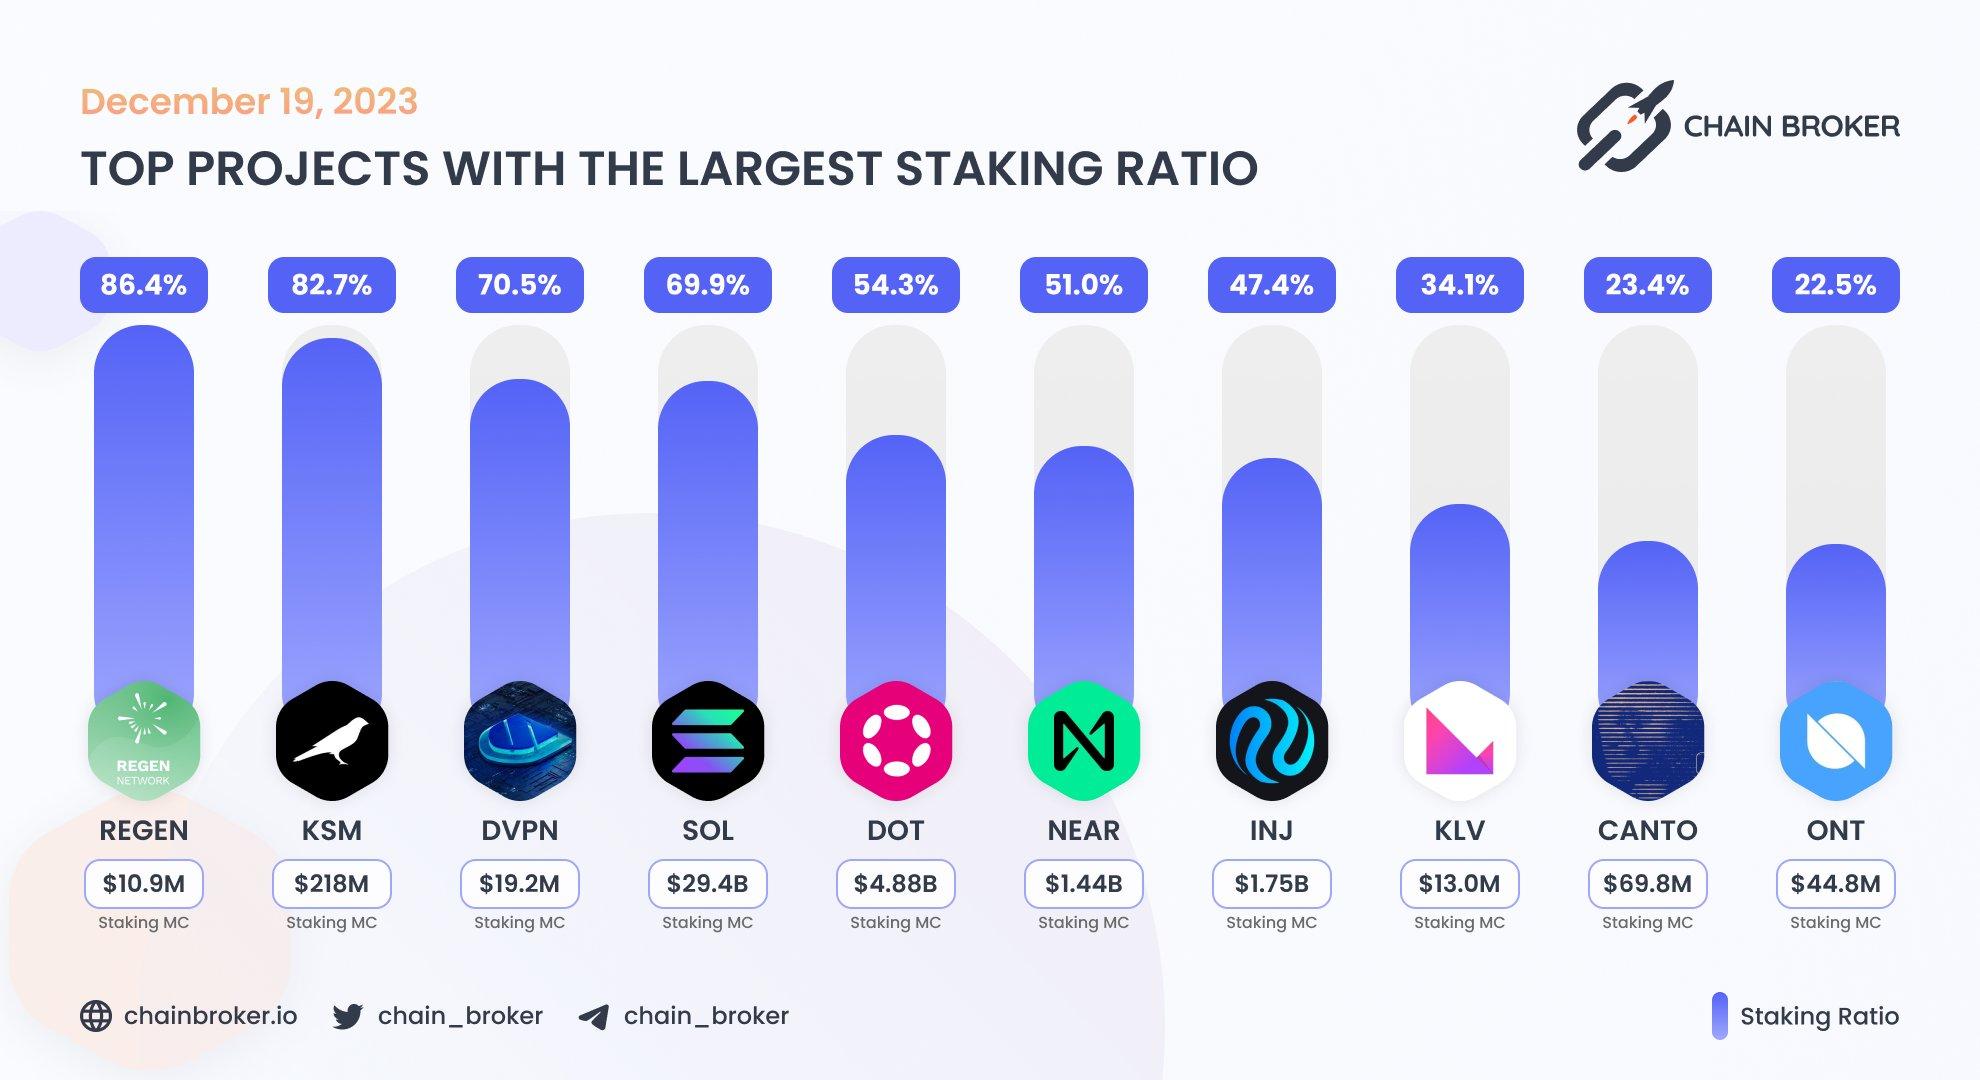 Top projects with the largest staking ratio